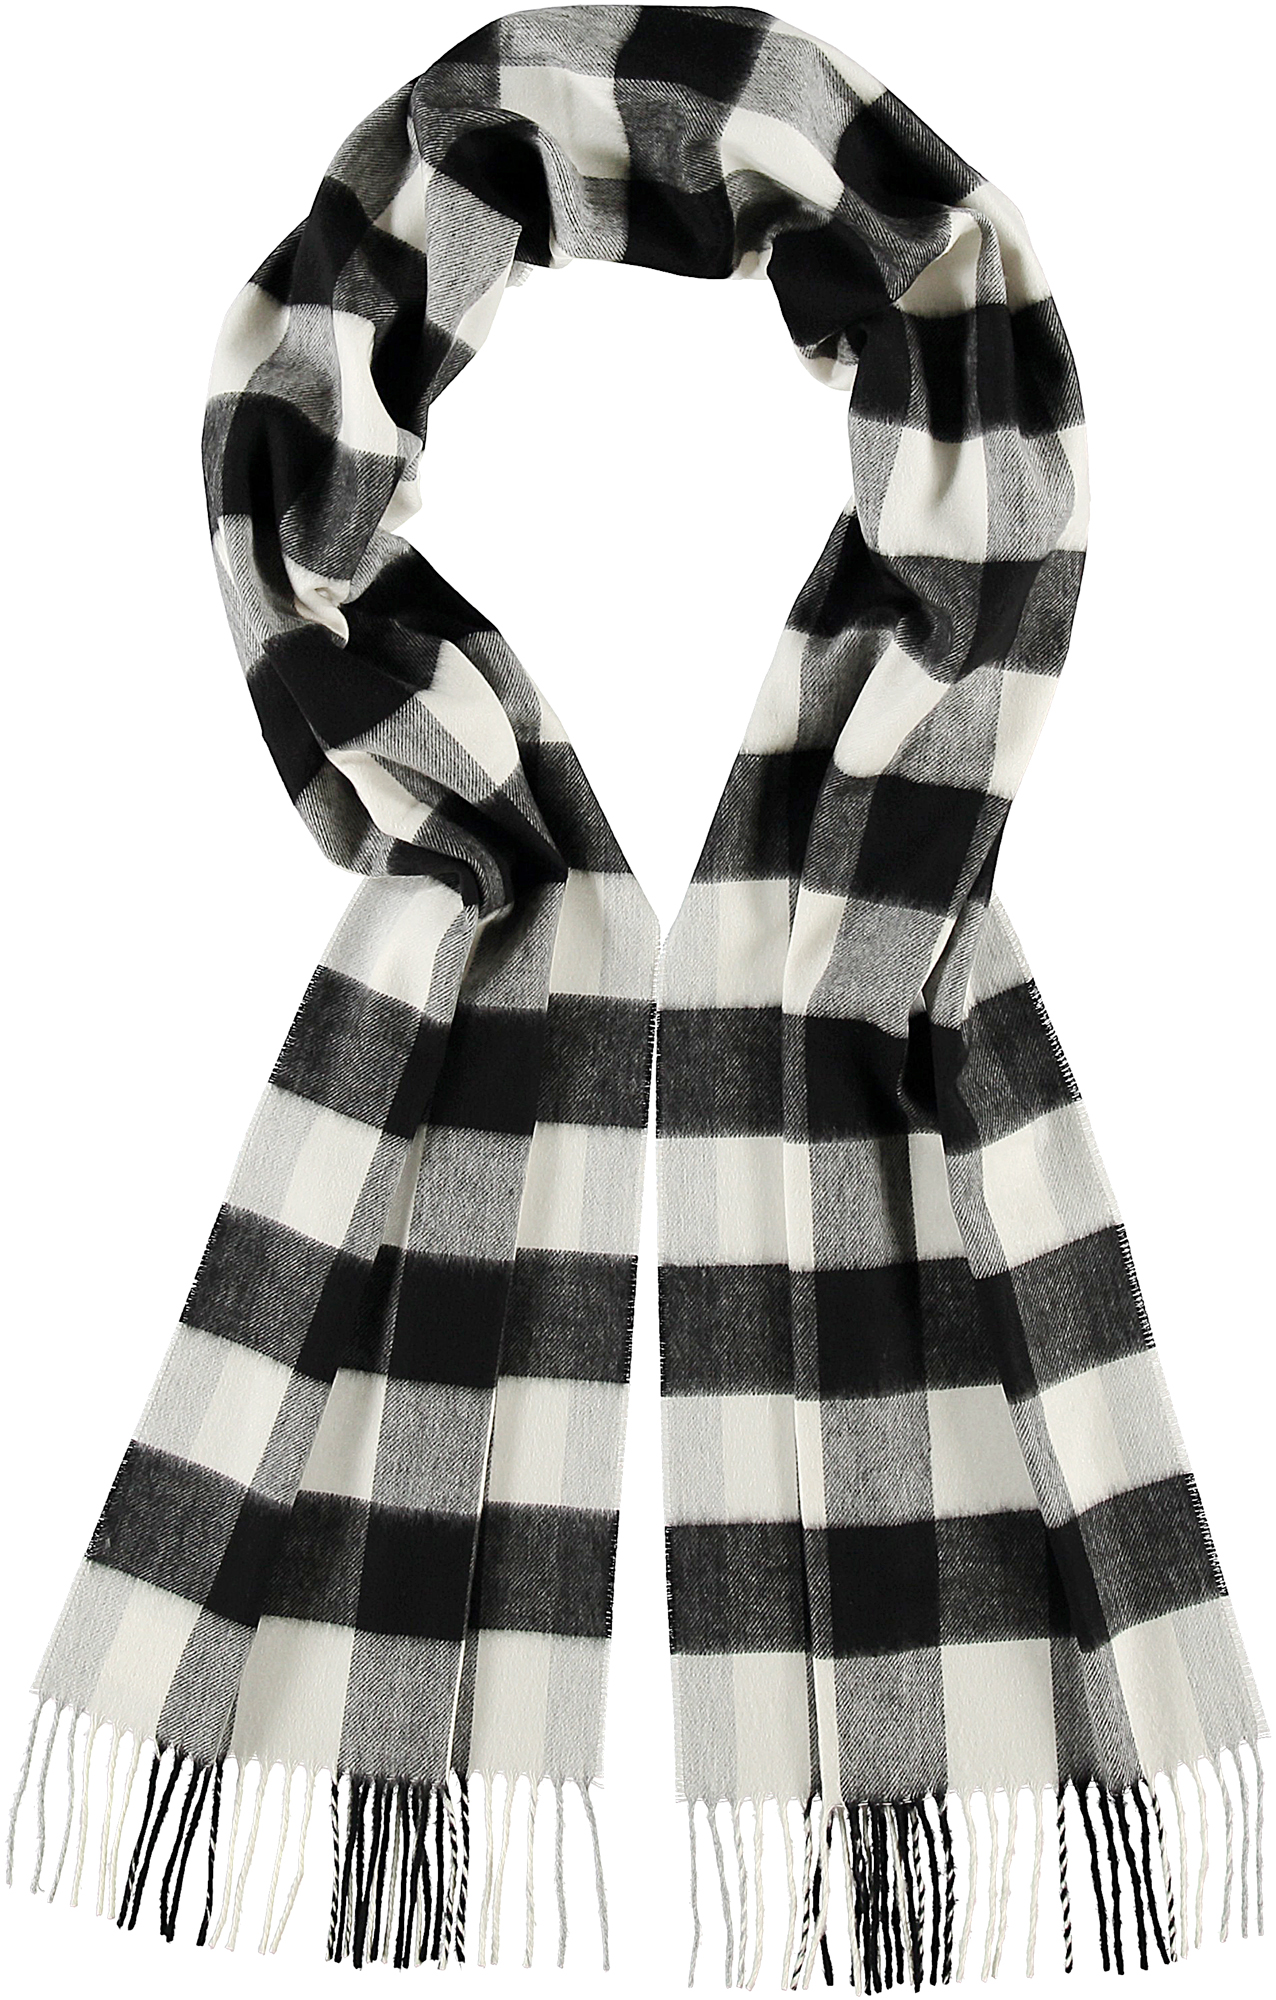 Buffalo Check in Black&White- $35.00 
Cashmink, Made in Germany
771899116095